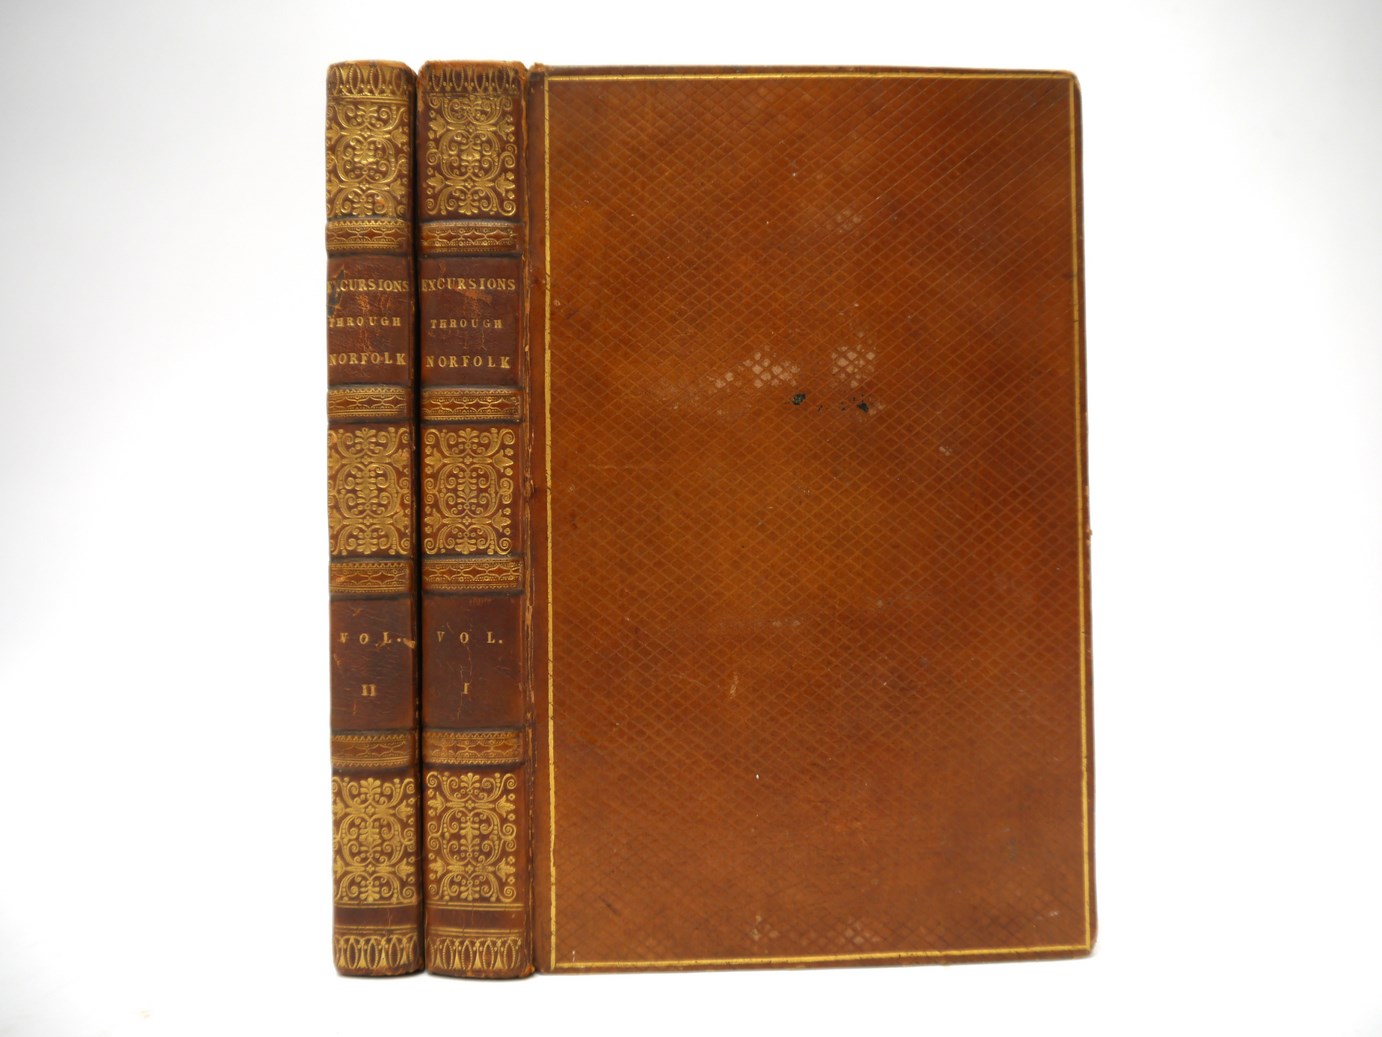 [Thomas Kitson Cromwell]: 'Excursions in the County of Norfolk', London, 1818, large paper edition,